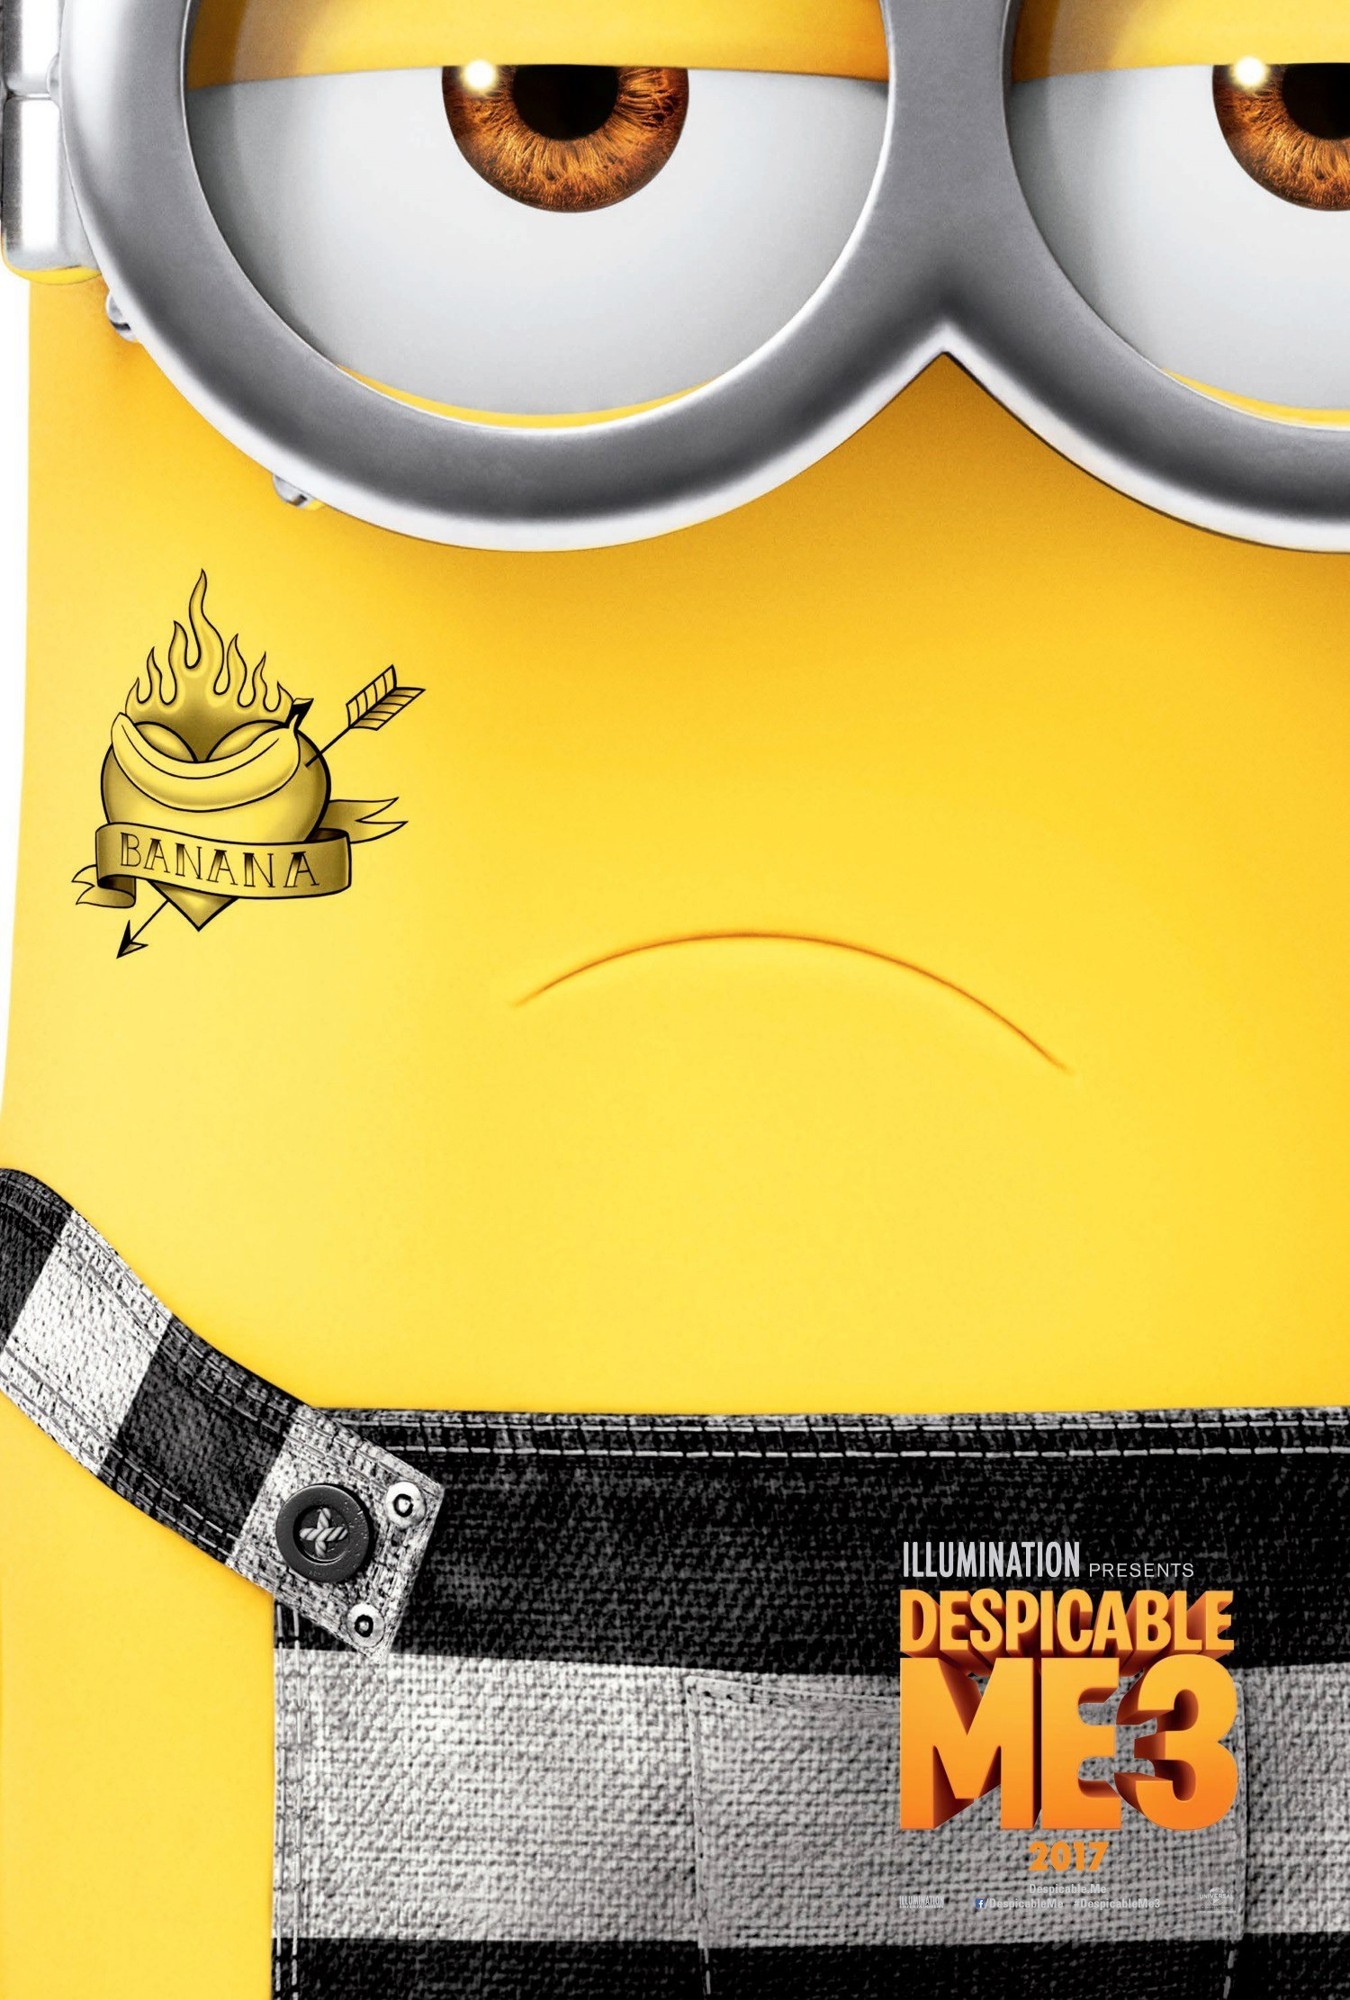 Despicable Me 3 download the new for apple